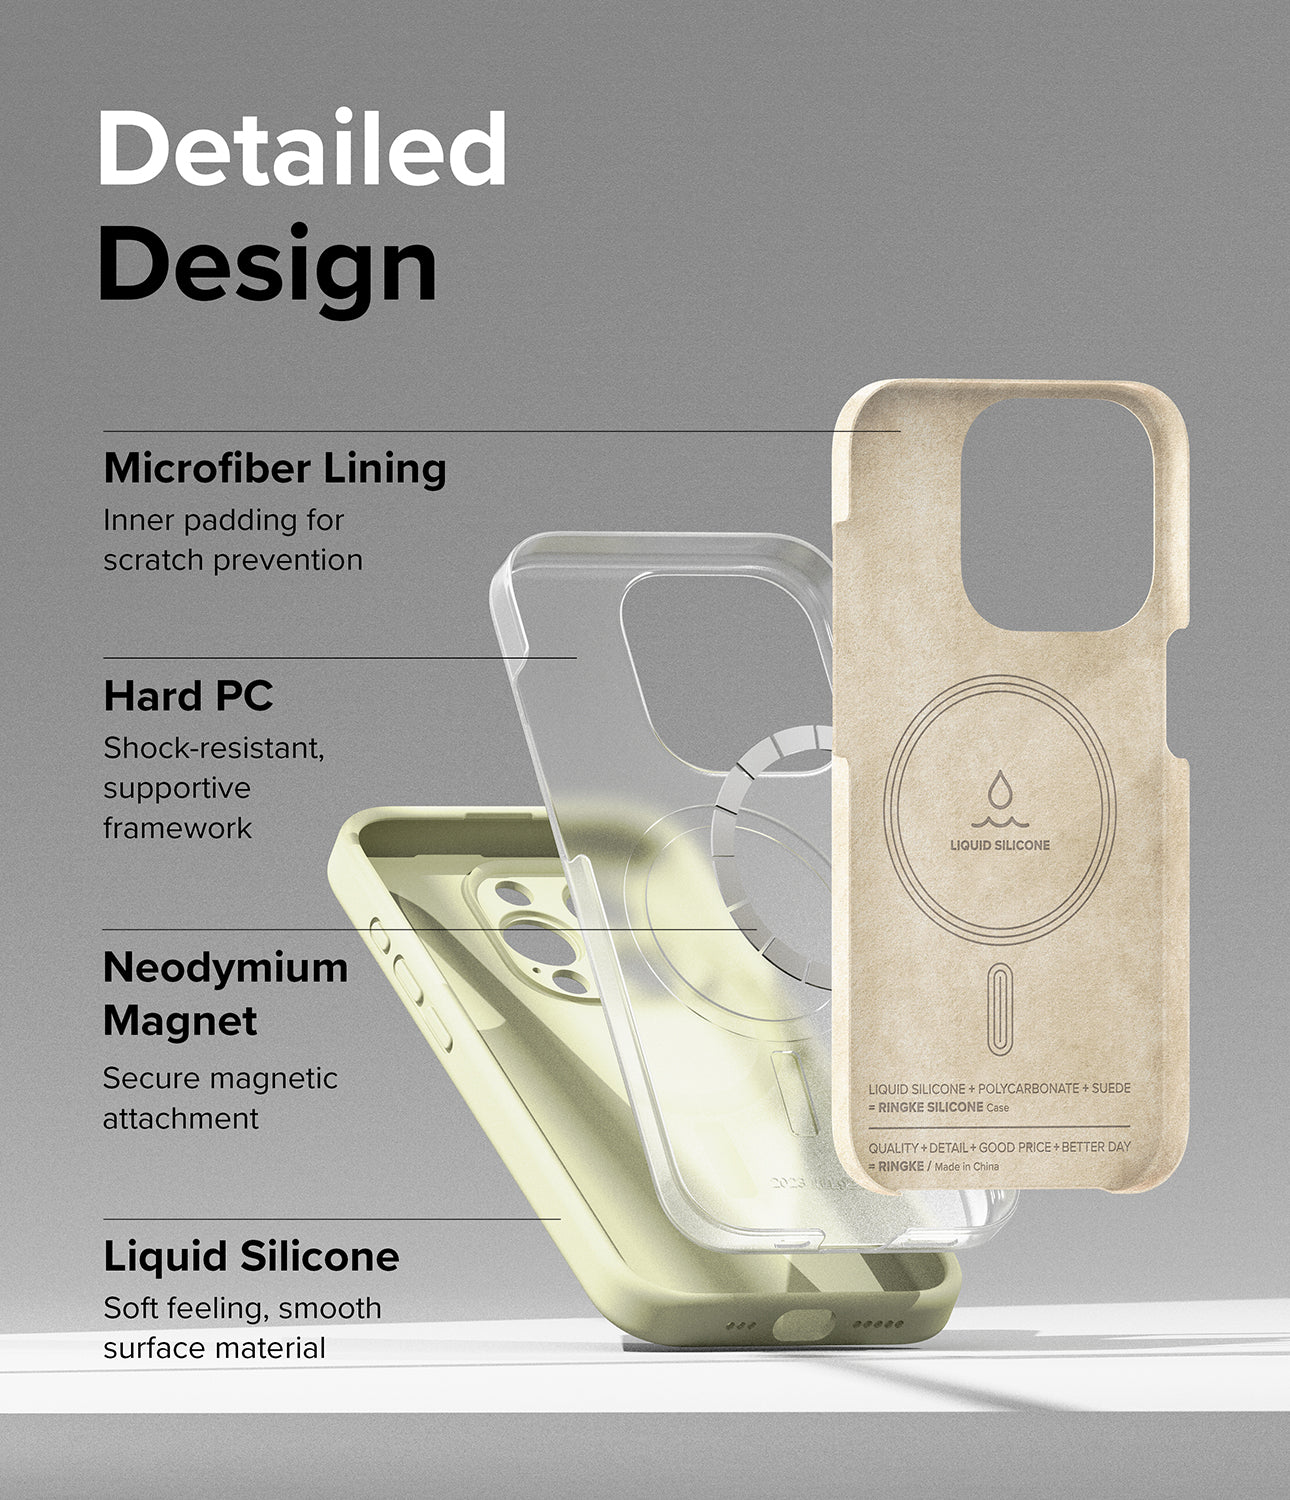 iPhone 15 Pro Max Case | Silicone Magnetic - Sunny Lime - Detailed Design. Inner padding for scratch prevention with Microfiber Lining. Shock-resistant, supportive framework with Hard PC. Neodymium Magnet to secure magnetic attachment . Soft feeling, smooth surface material with Liquid Silicone.